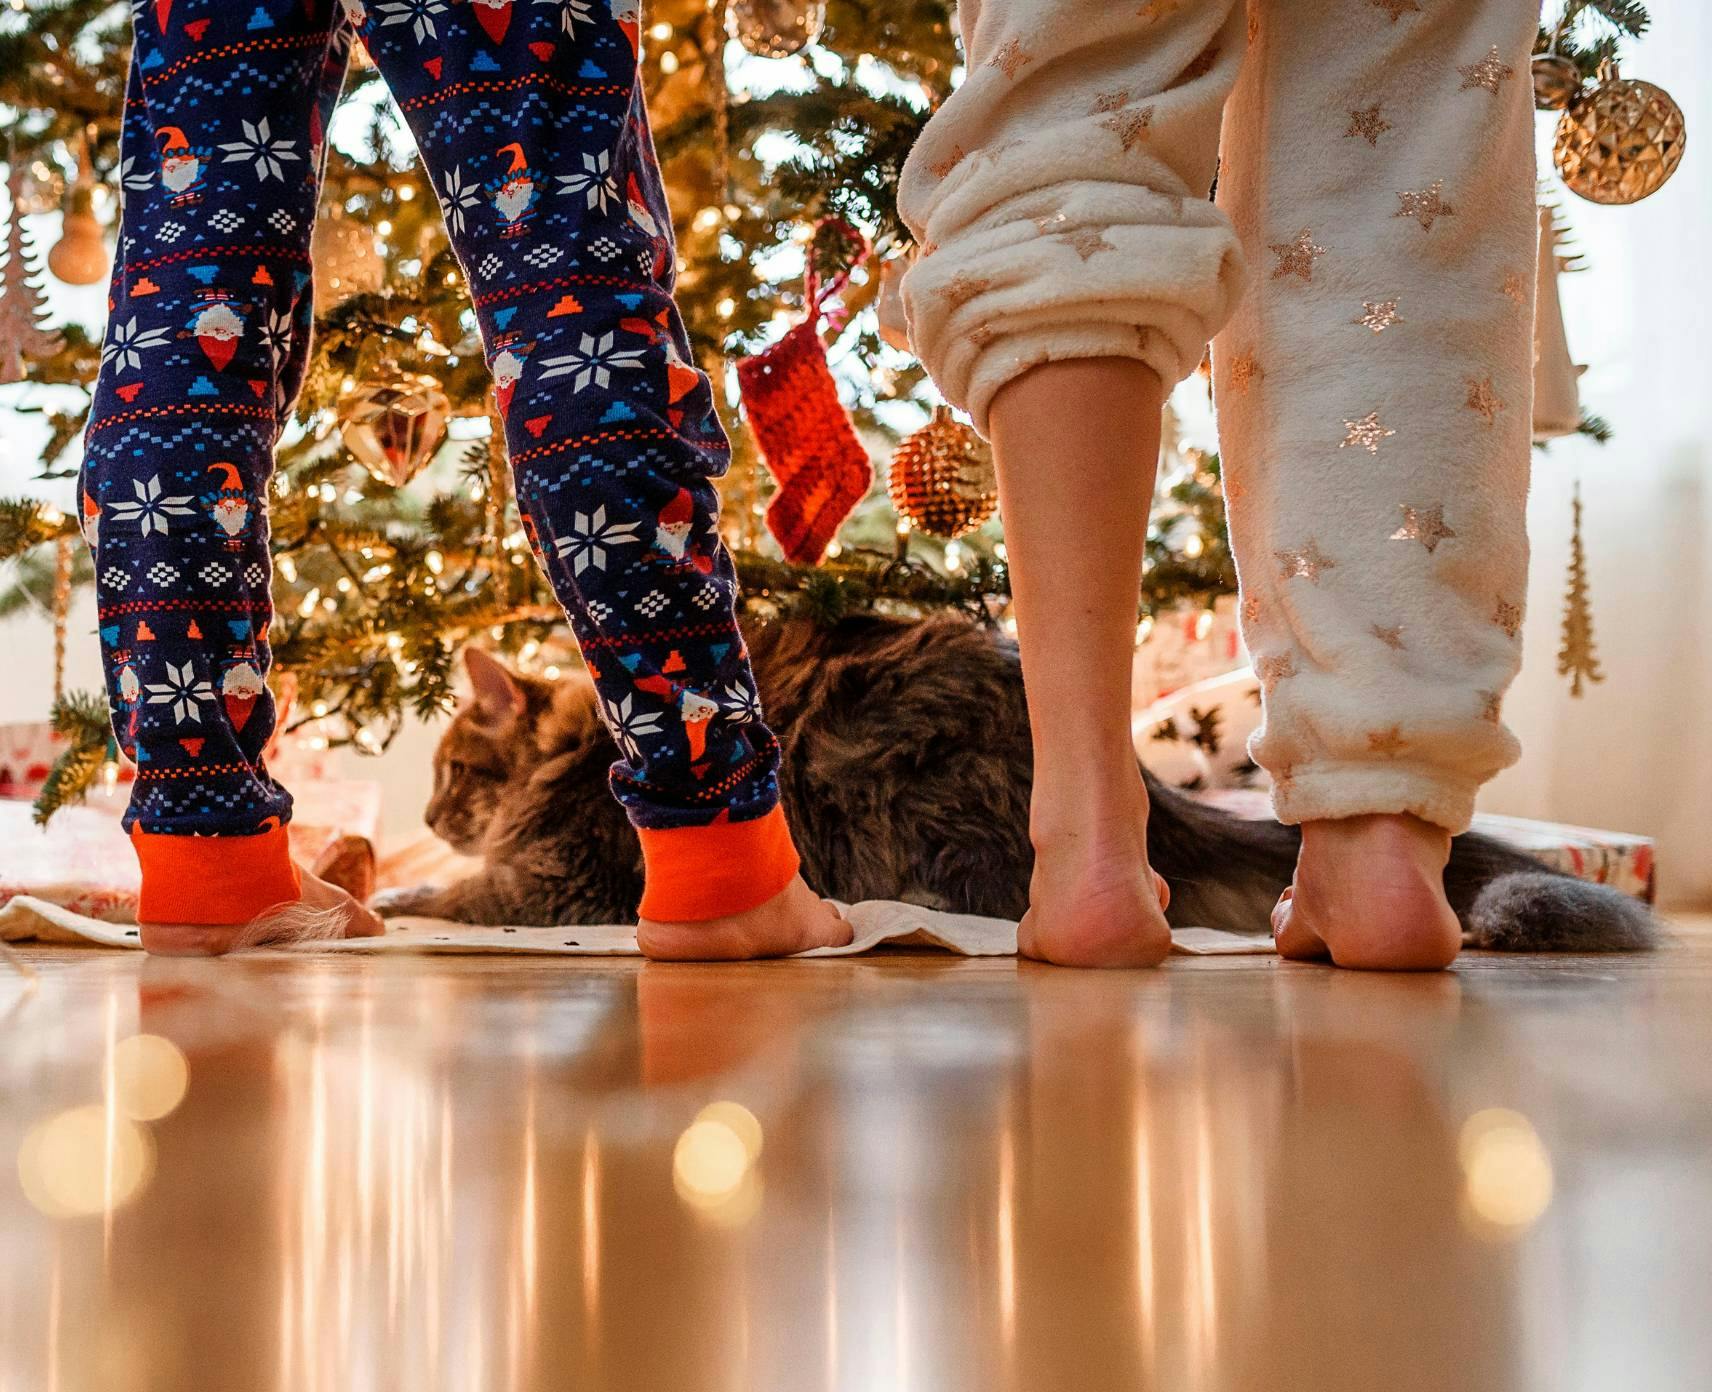 The legs of three children in pyjamas as they surround a Christmas tree